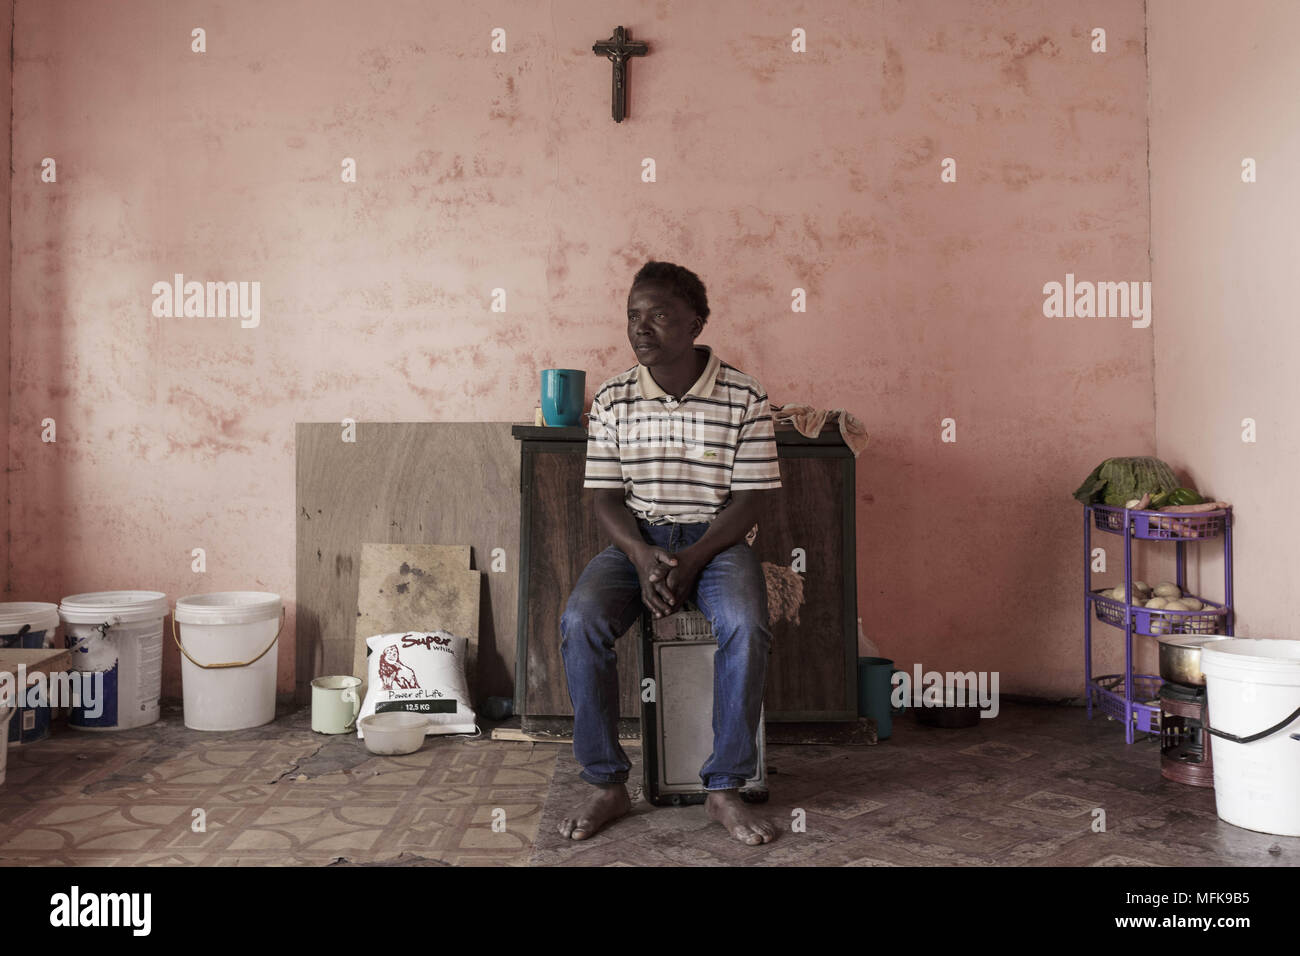 January 13, 2018 - Matatiele, Eastern Cape, South Africa - Kagiso, 35, sits in his mud house, which serves as a kitchen and a sleeping room for him and his two brothers. (Credit Image: © Stefan Kleinowitz via ZUMA Wire) Stock Photo